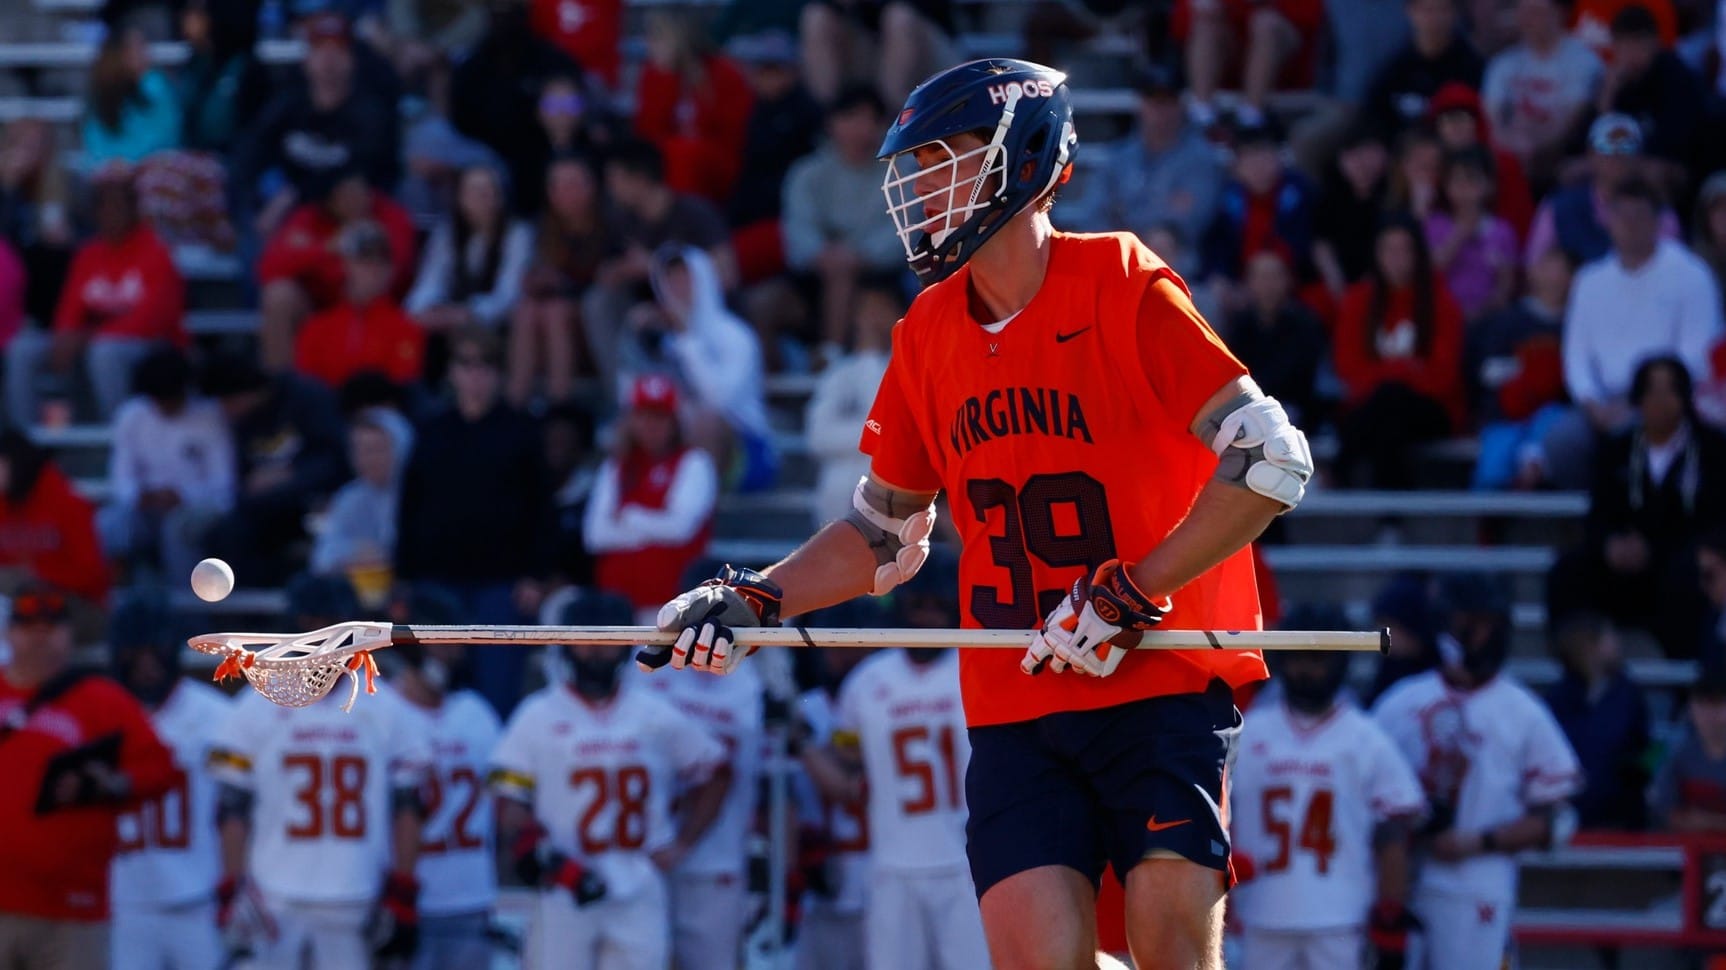 Virginia Lacrosse All-American Cole Kastner Transferring to Play Basketball at Stanford